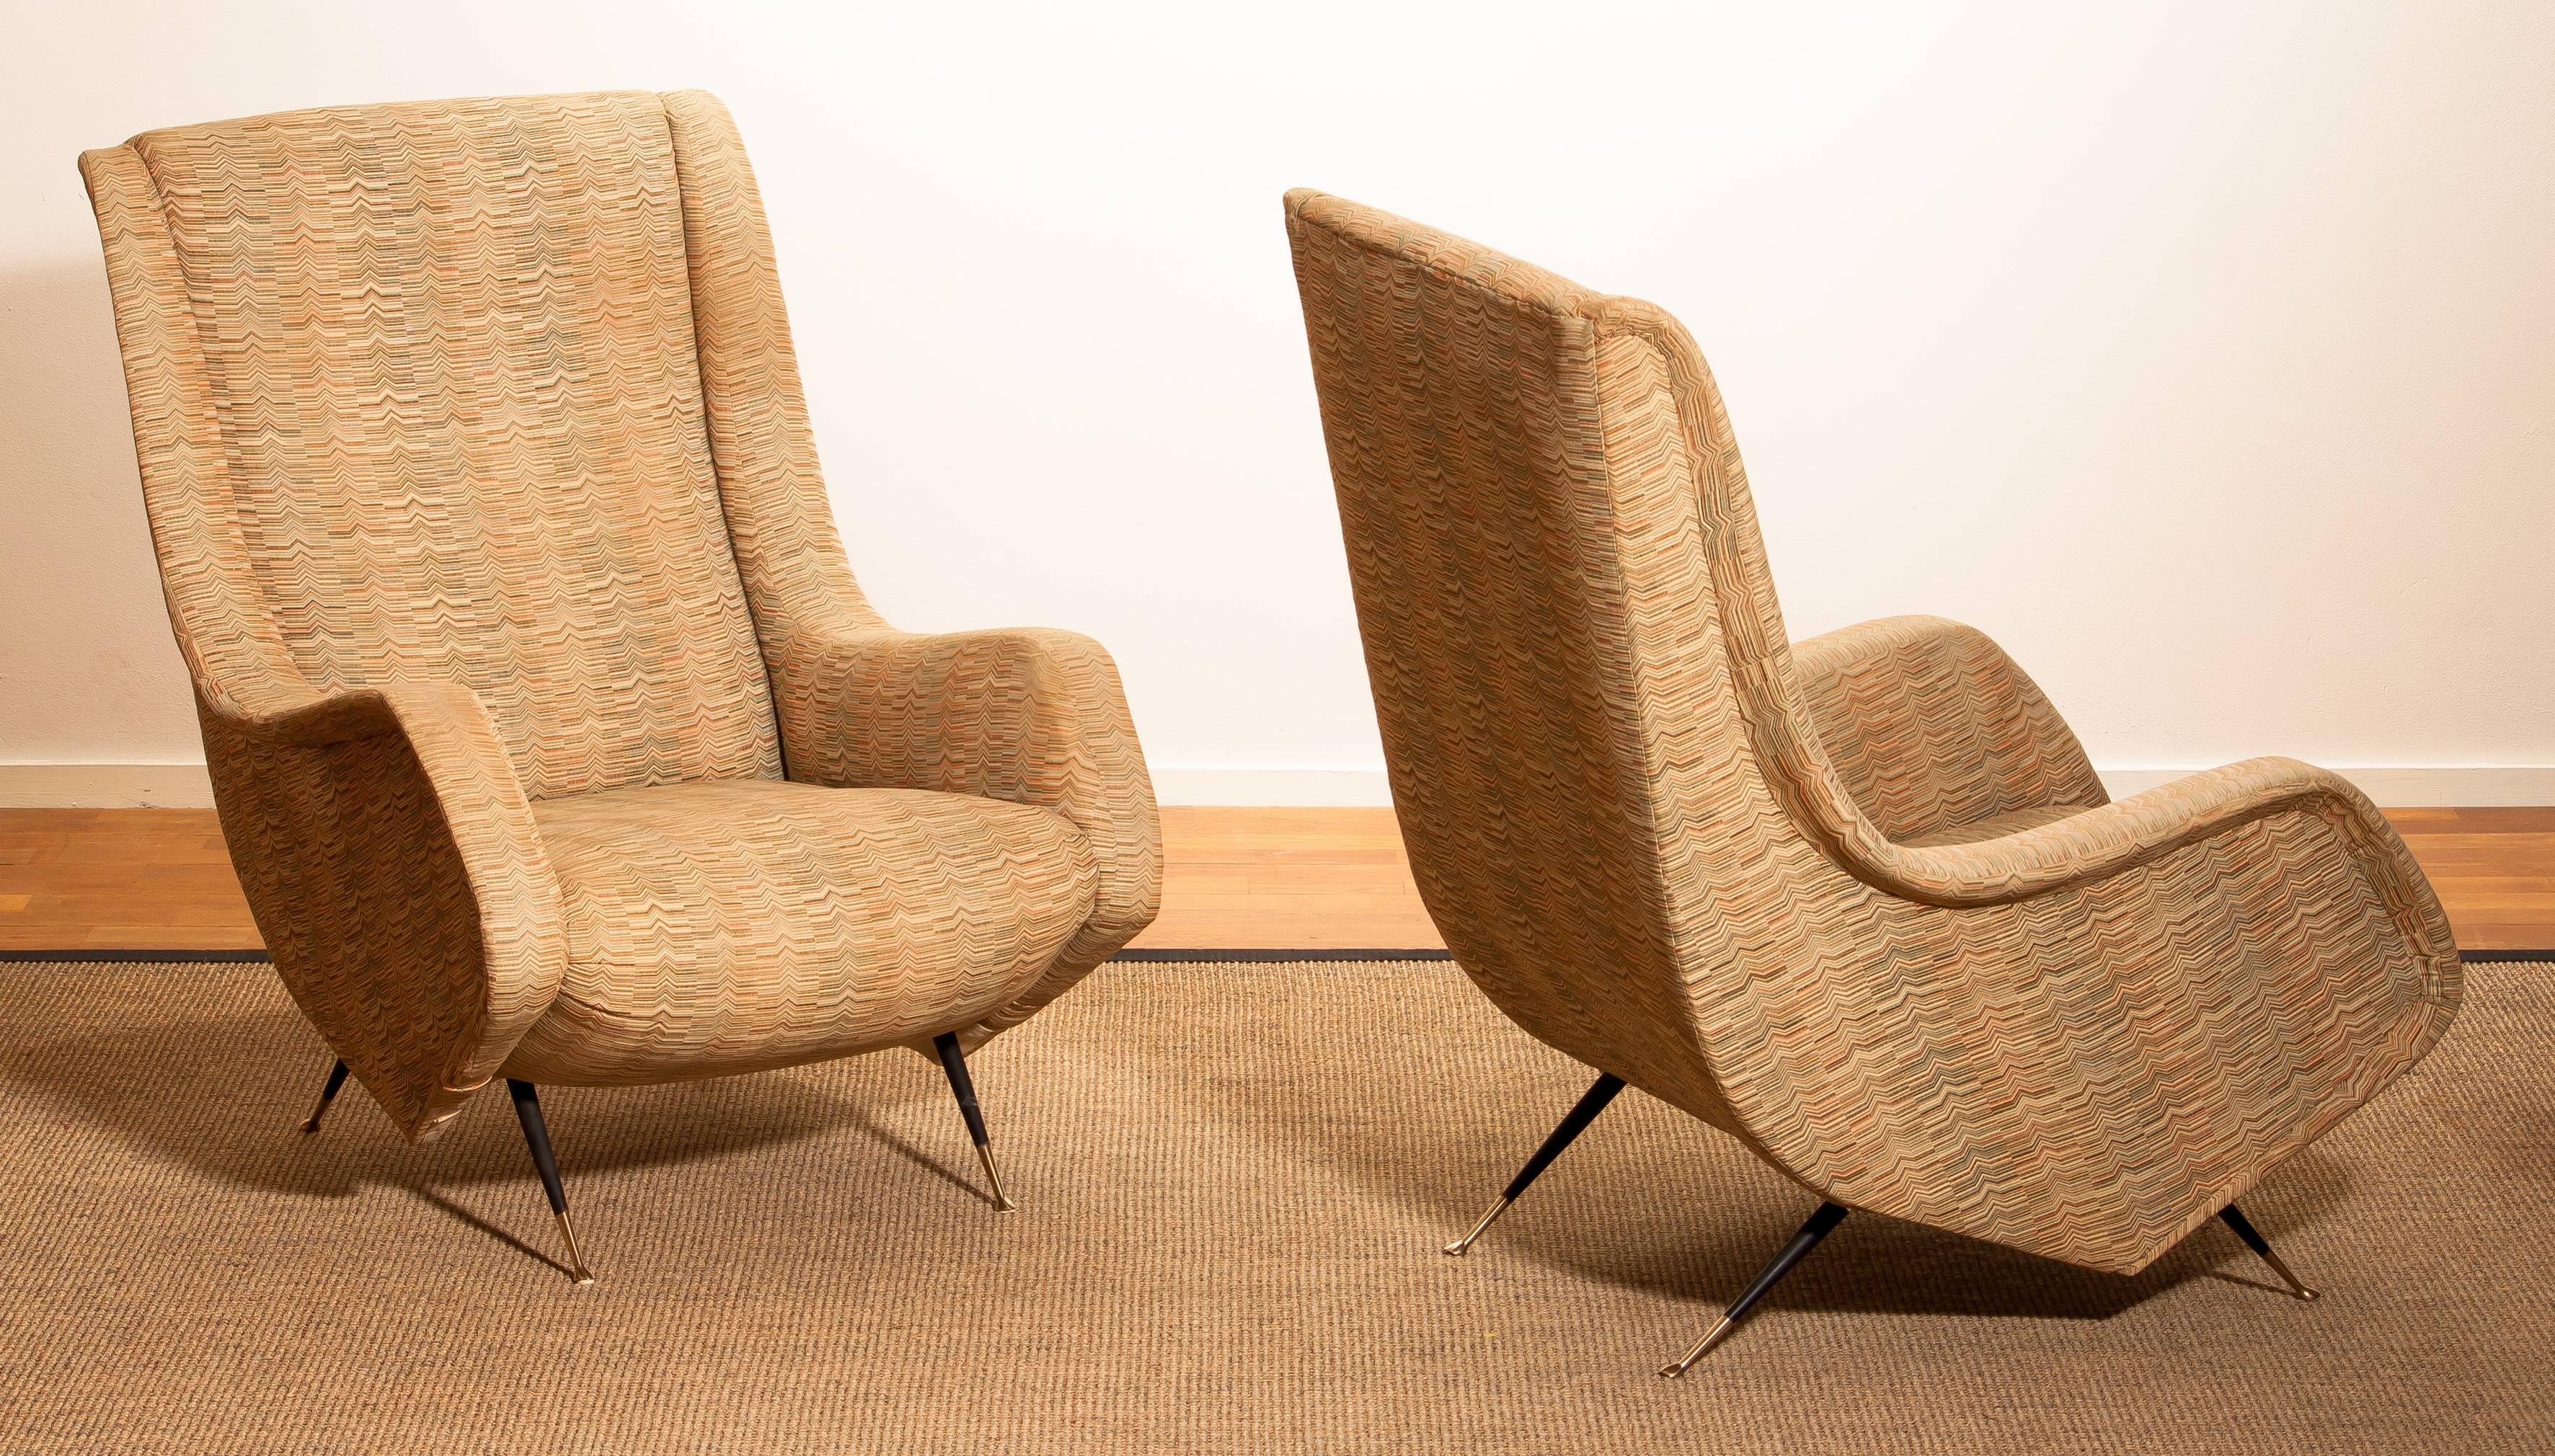 Brass Set of Two Original Easy Chairs from the 1950s by Aldo Morbelli for Isa Bergamo